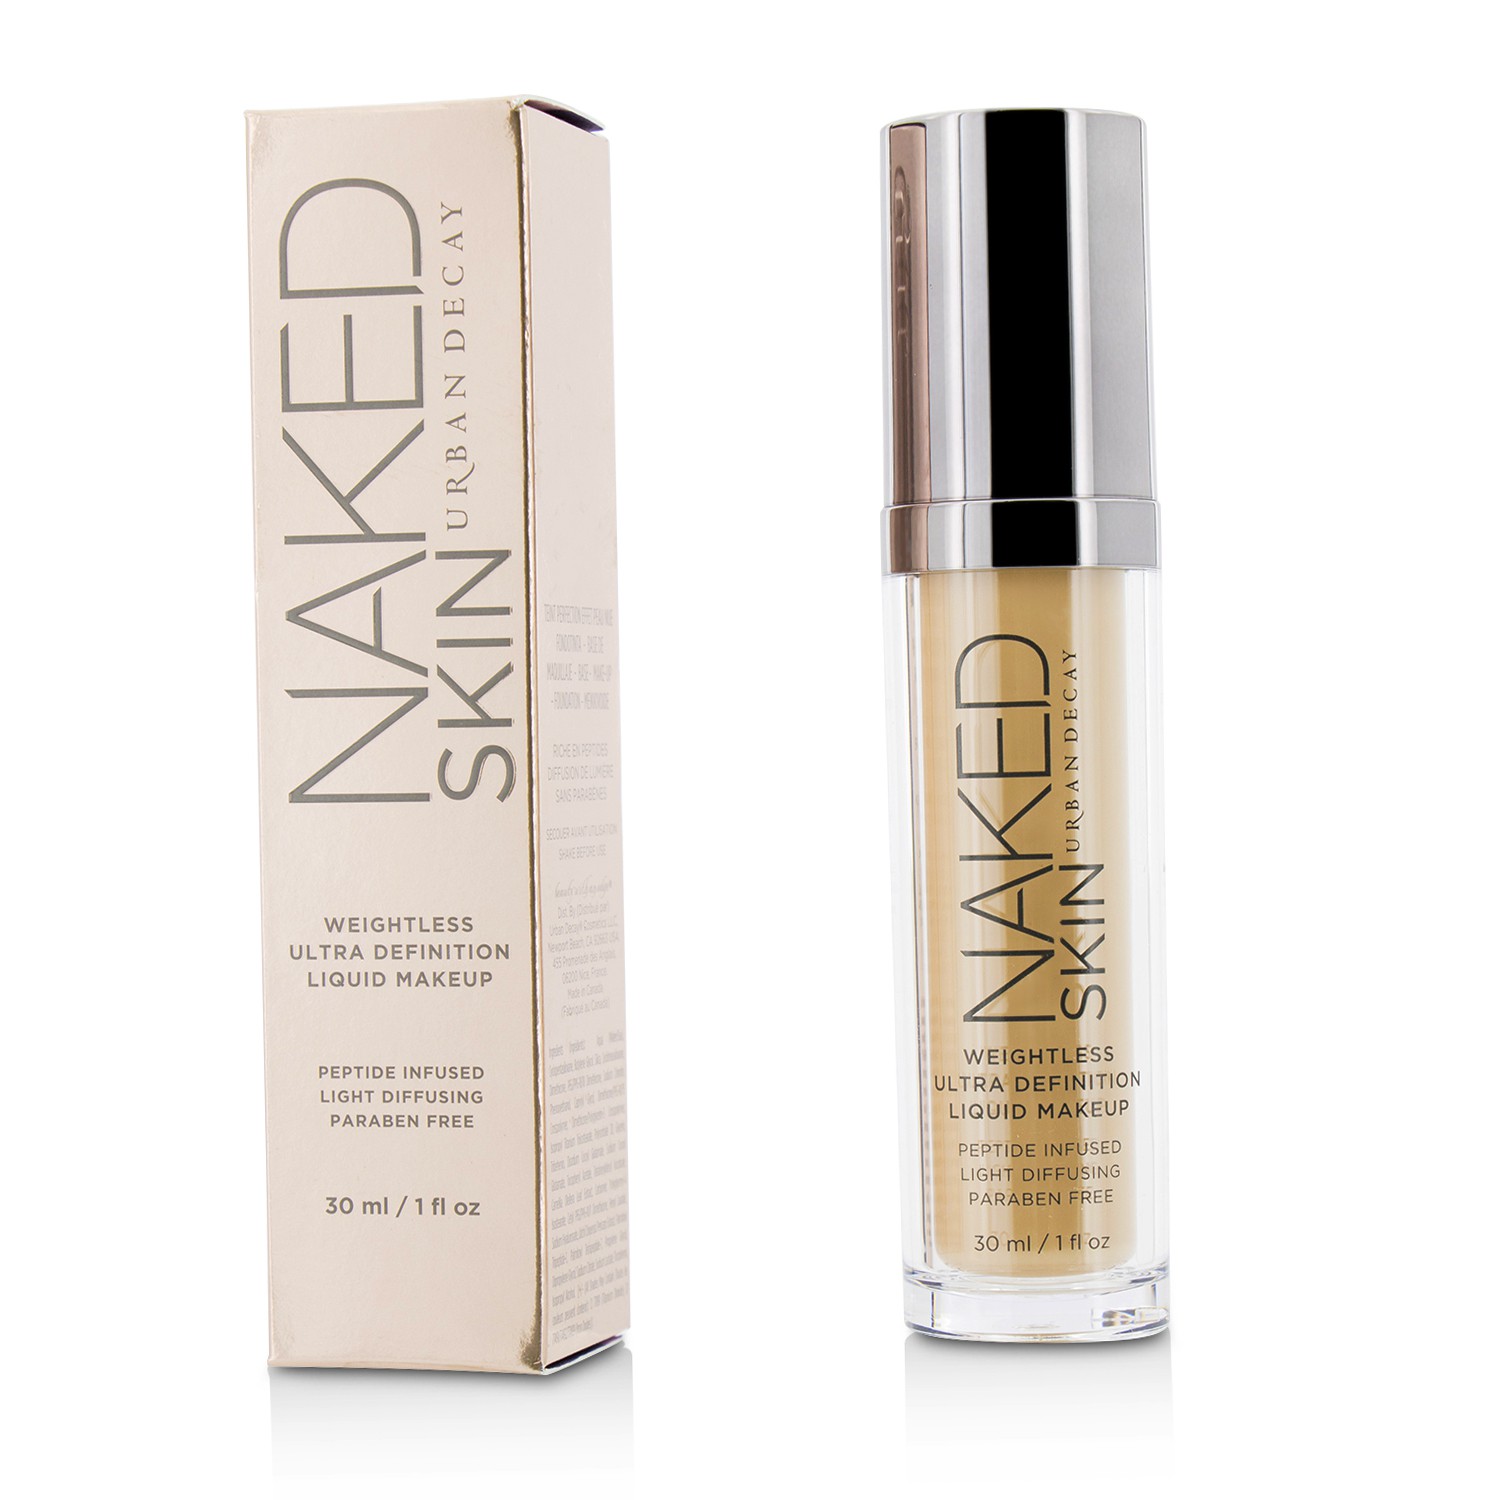 Naked Skin Weightless Ultra Definition Liquid Makeup - #2.0 Urban Decay Image